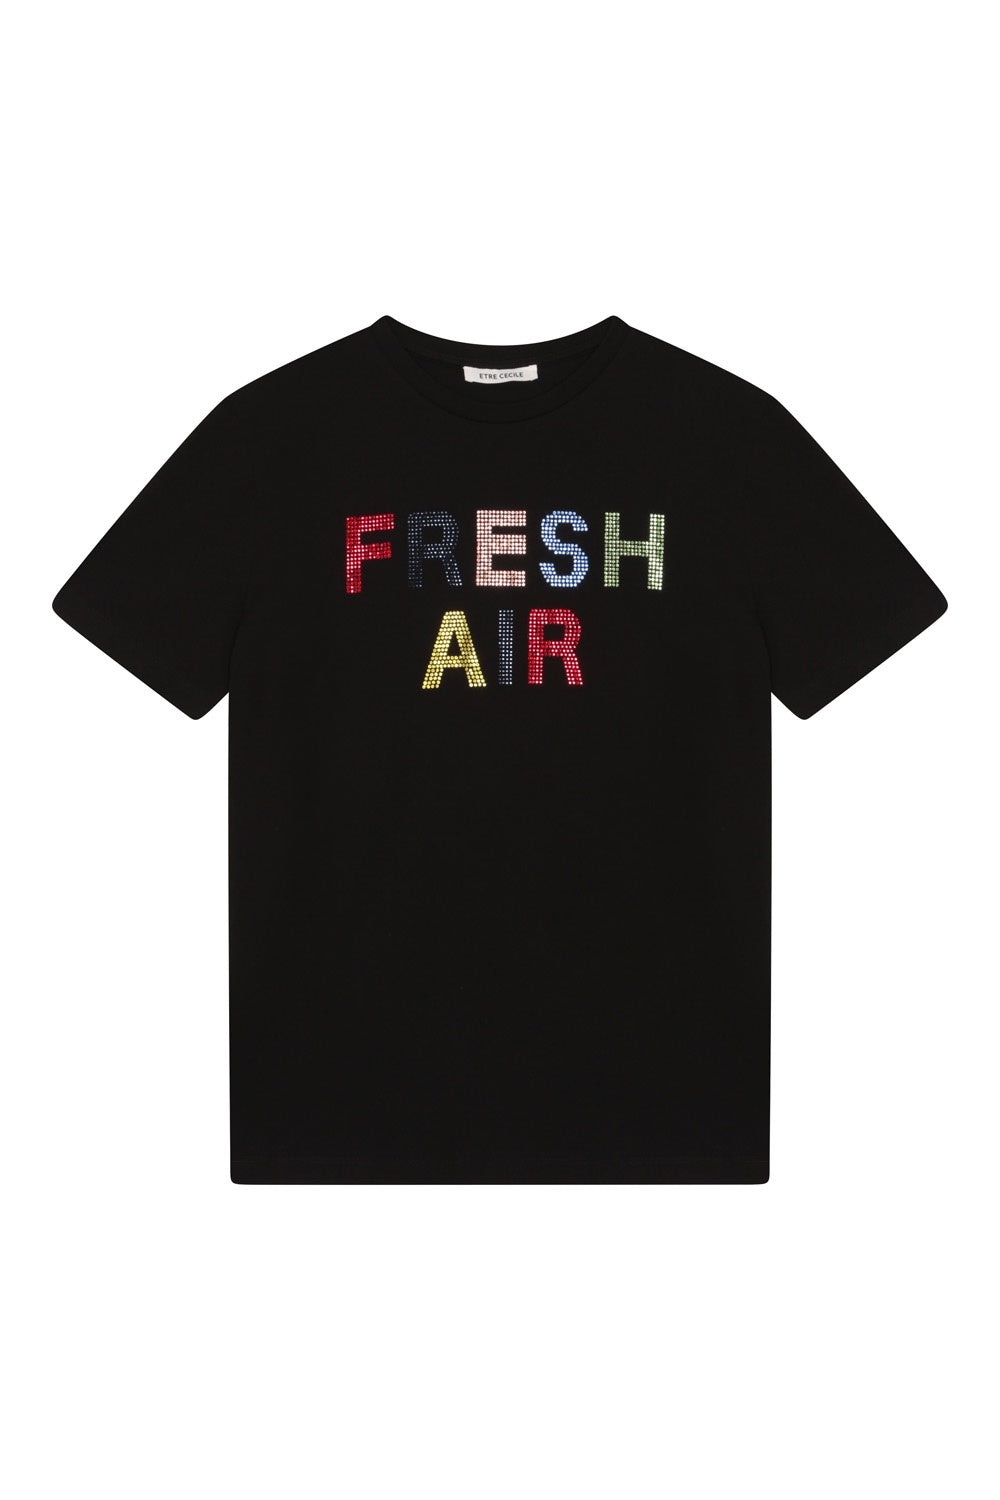 Fair T -Washed Black